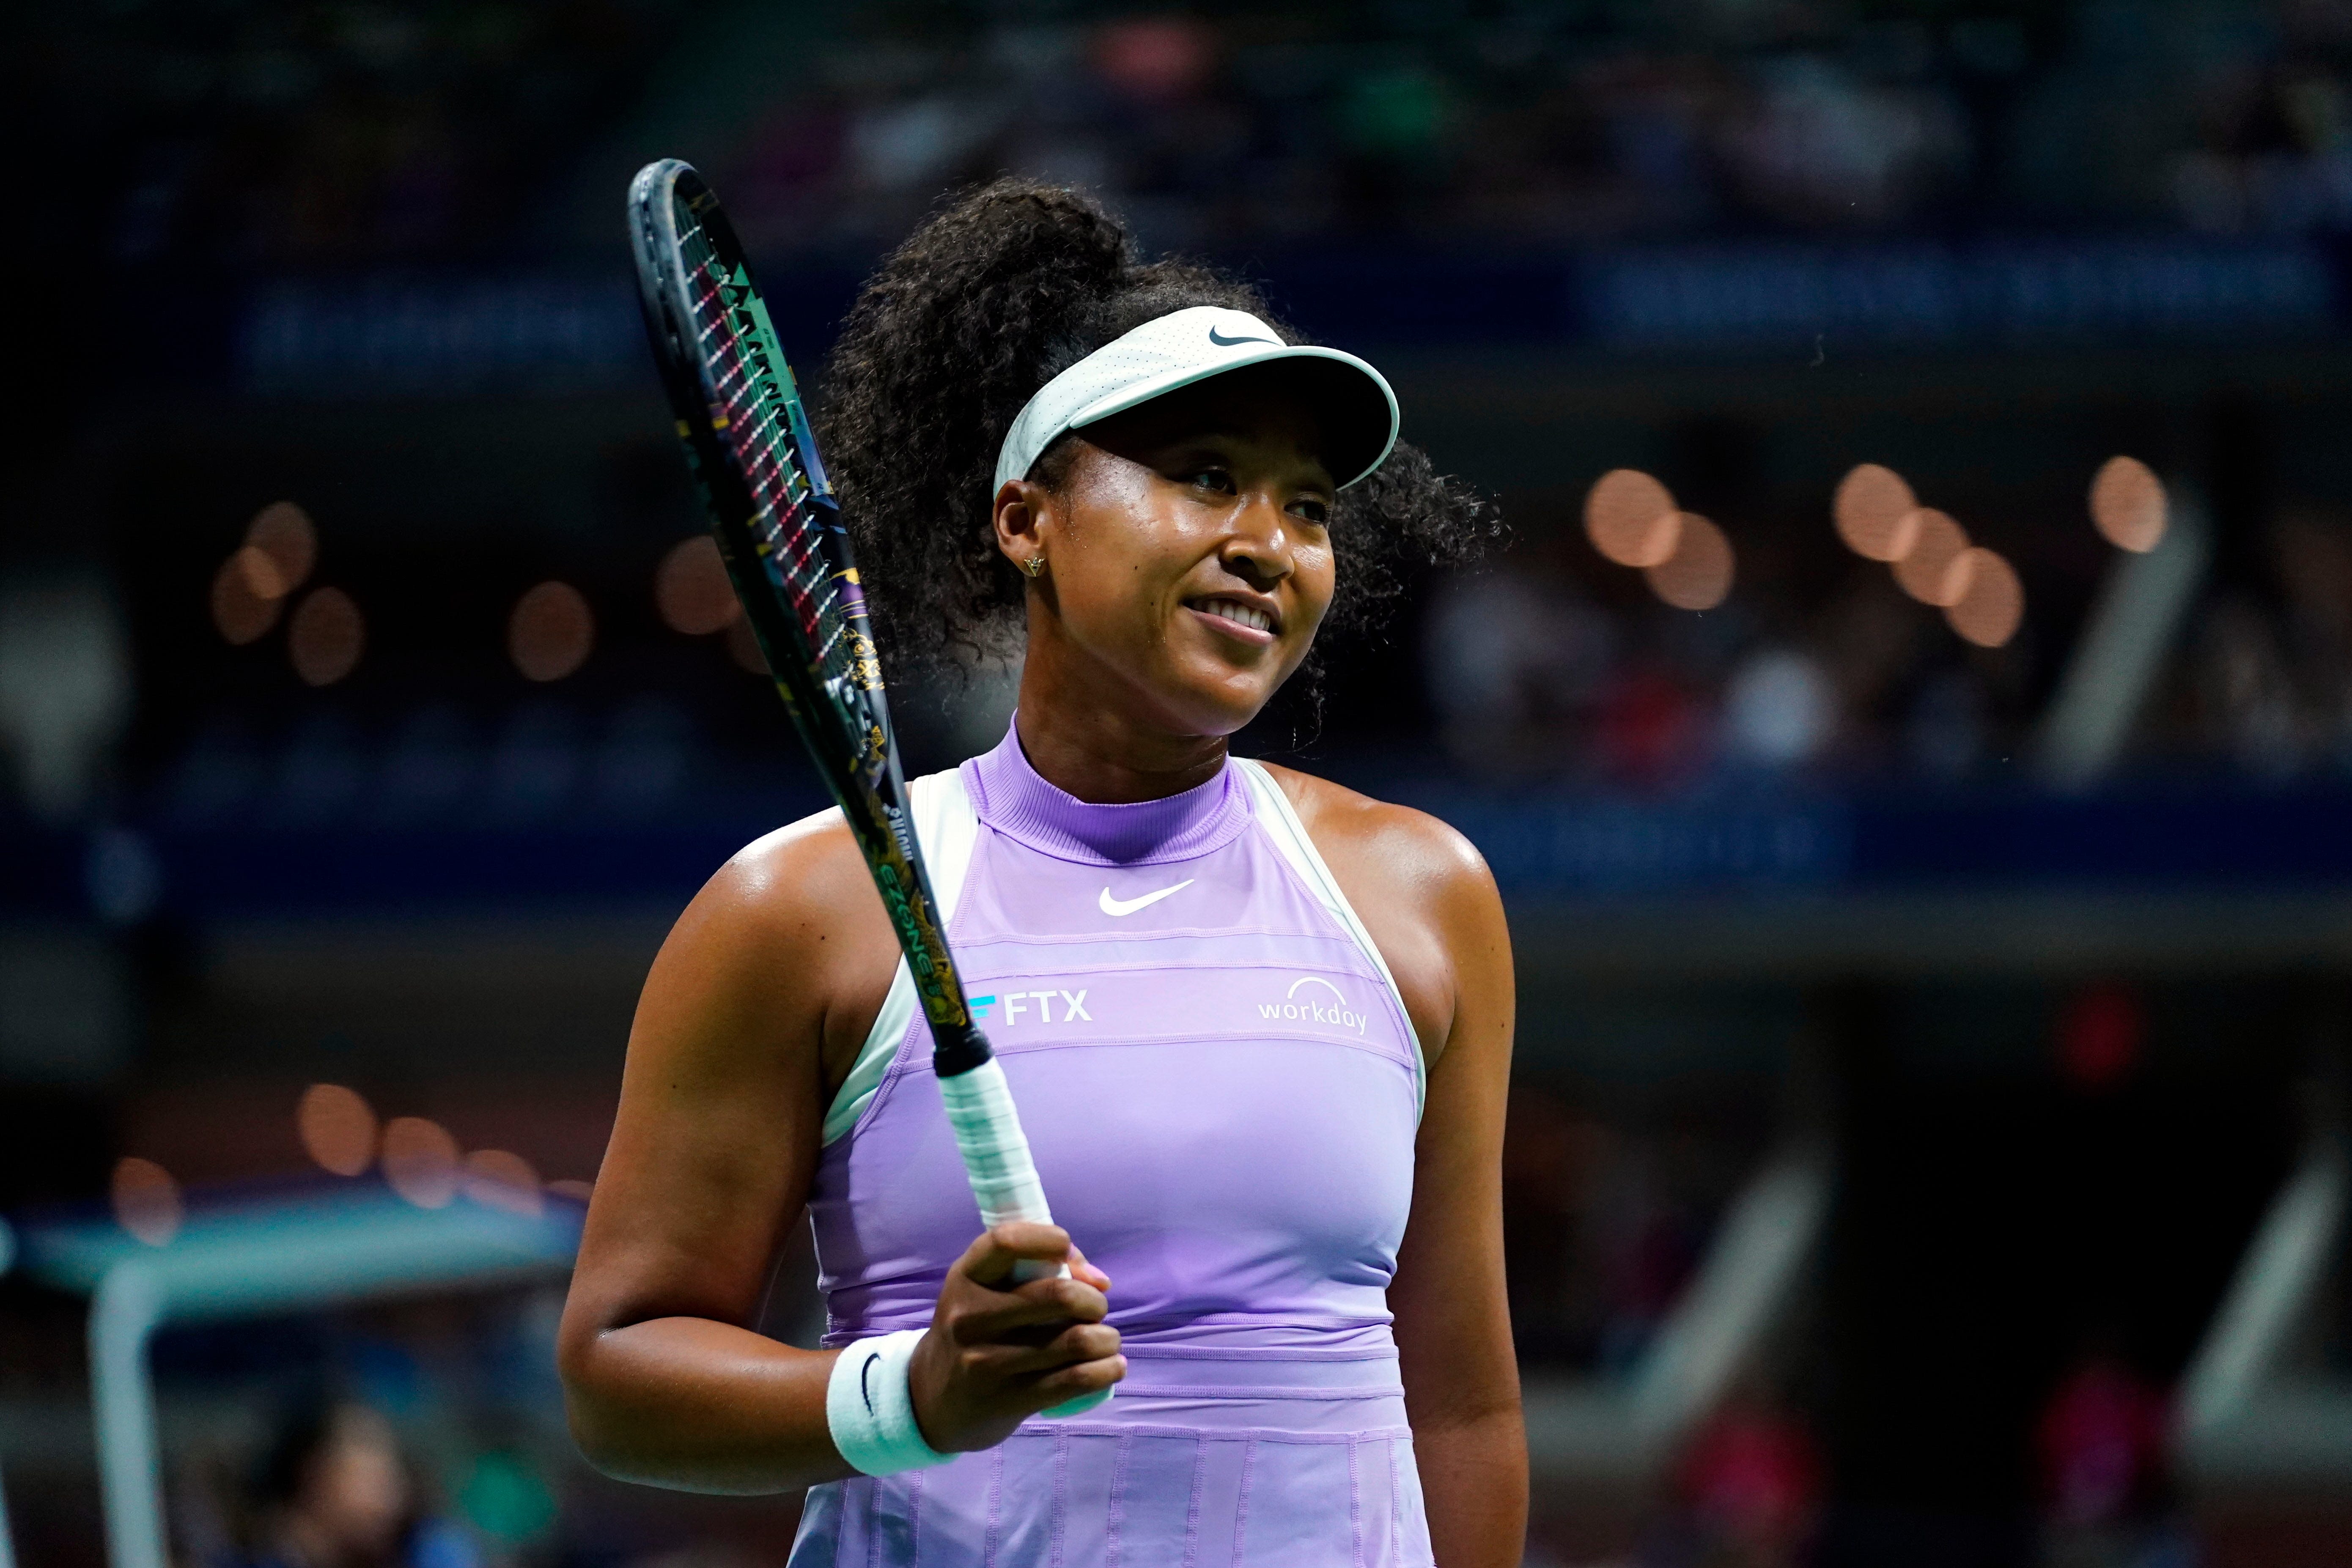 Naomi Osaka's message to young Asian players: Embrace your unique backgrounds and cultures